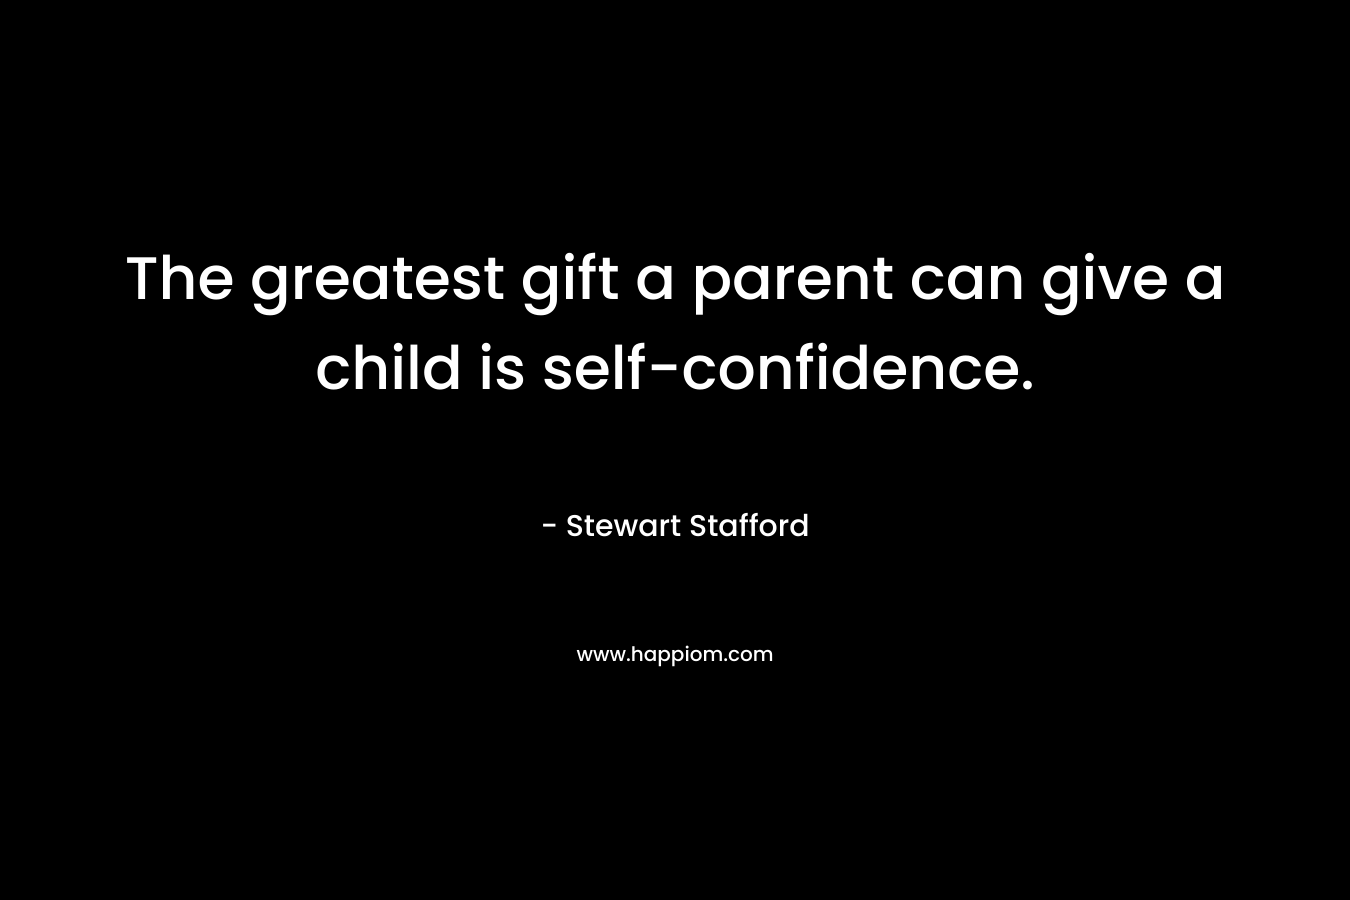 The greatest gift a parent can give a child is self-confidence. – Stewart Stafford